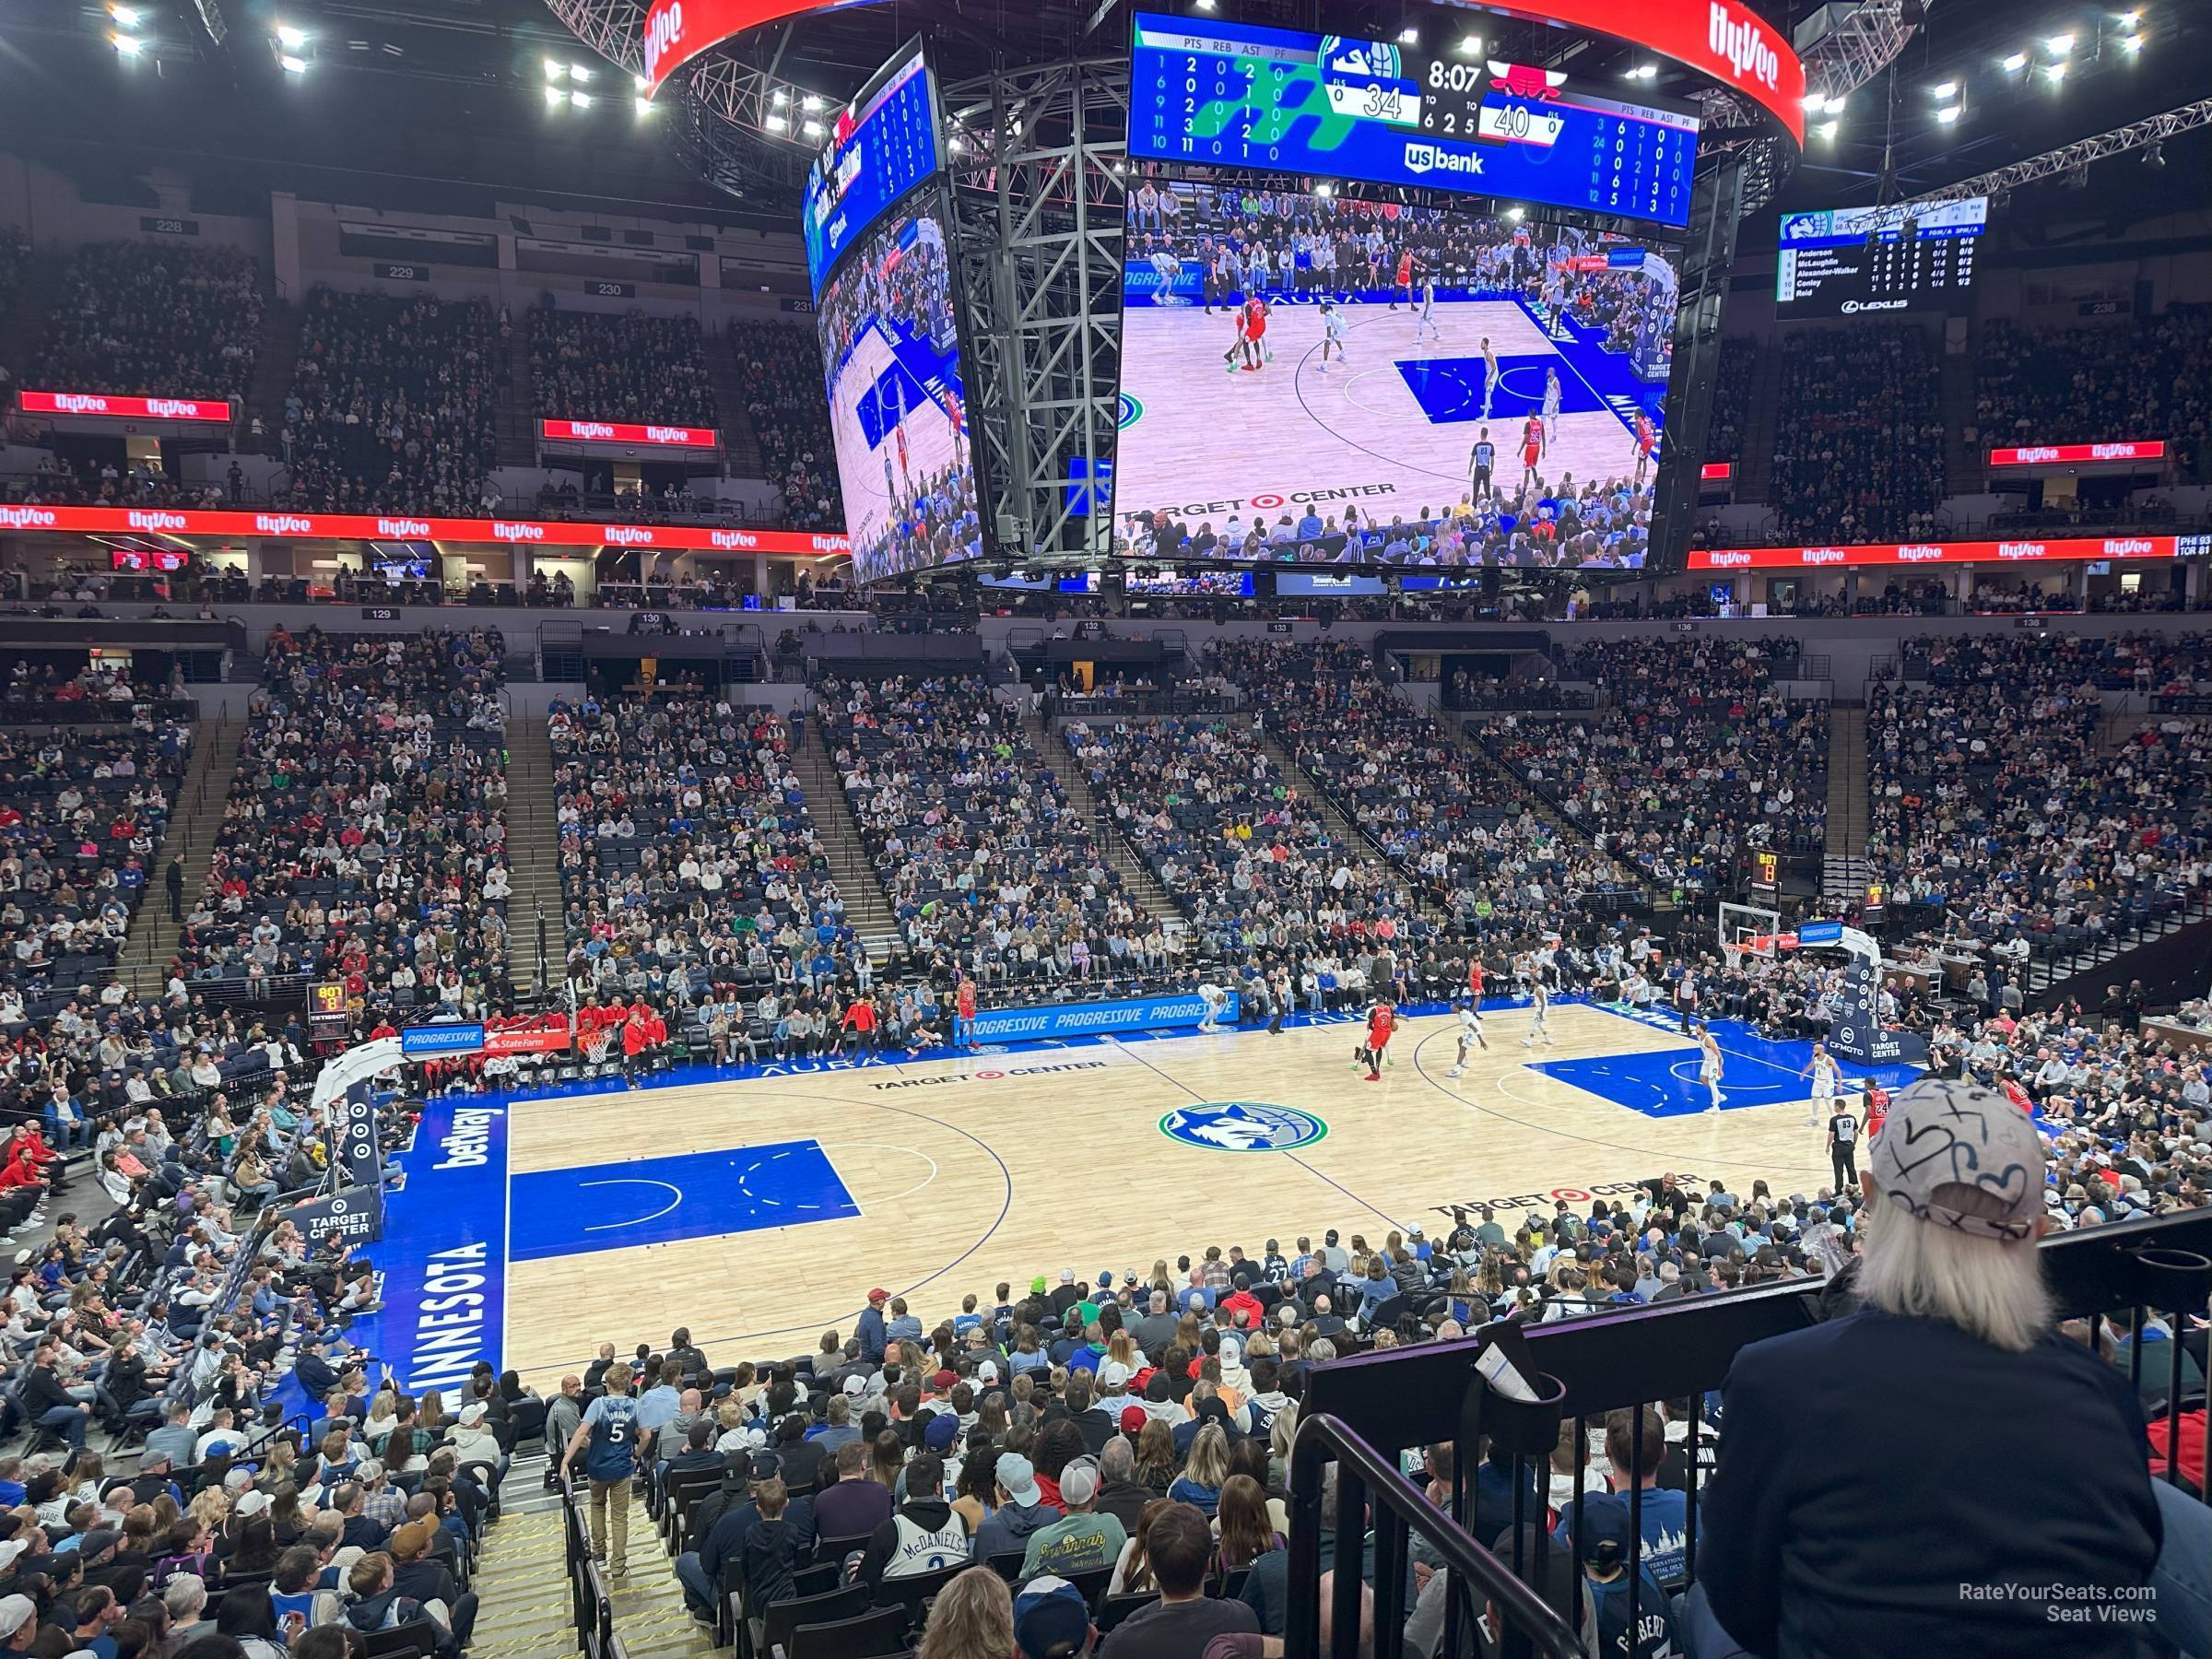 section 113, row u seat view  for basketball - target center